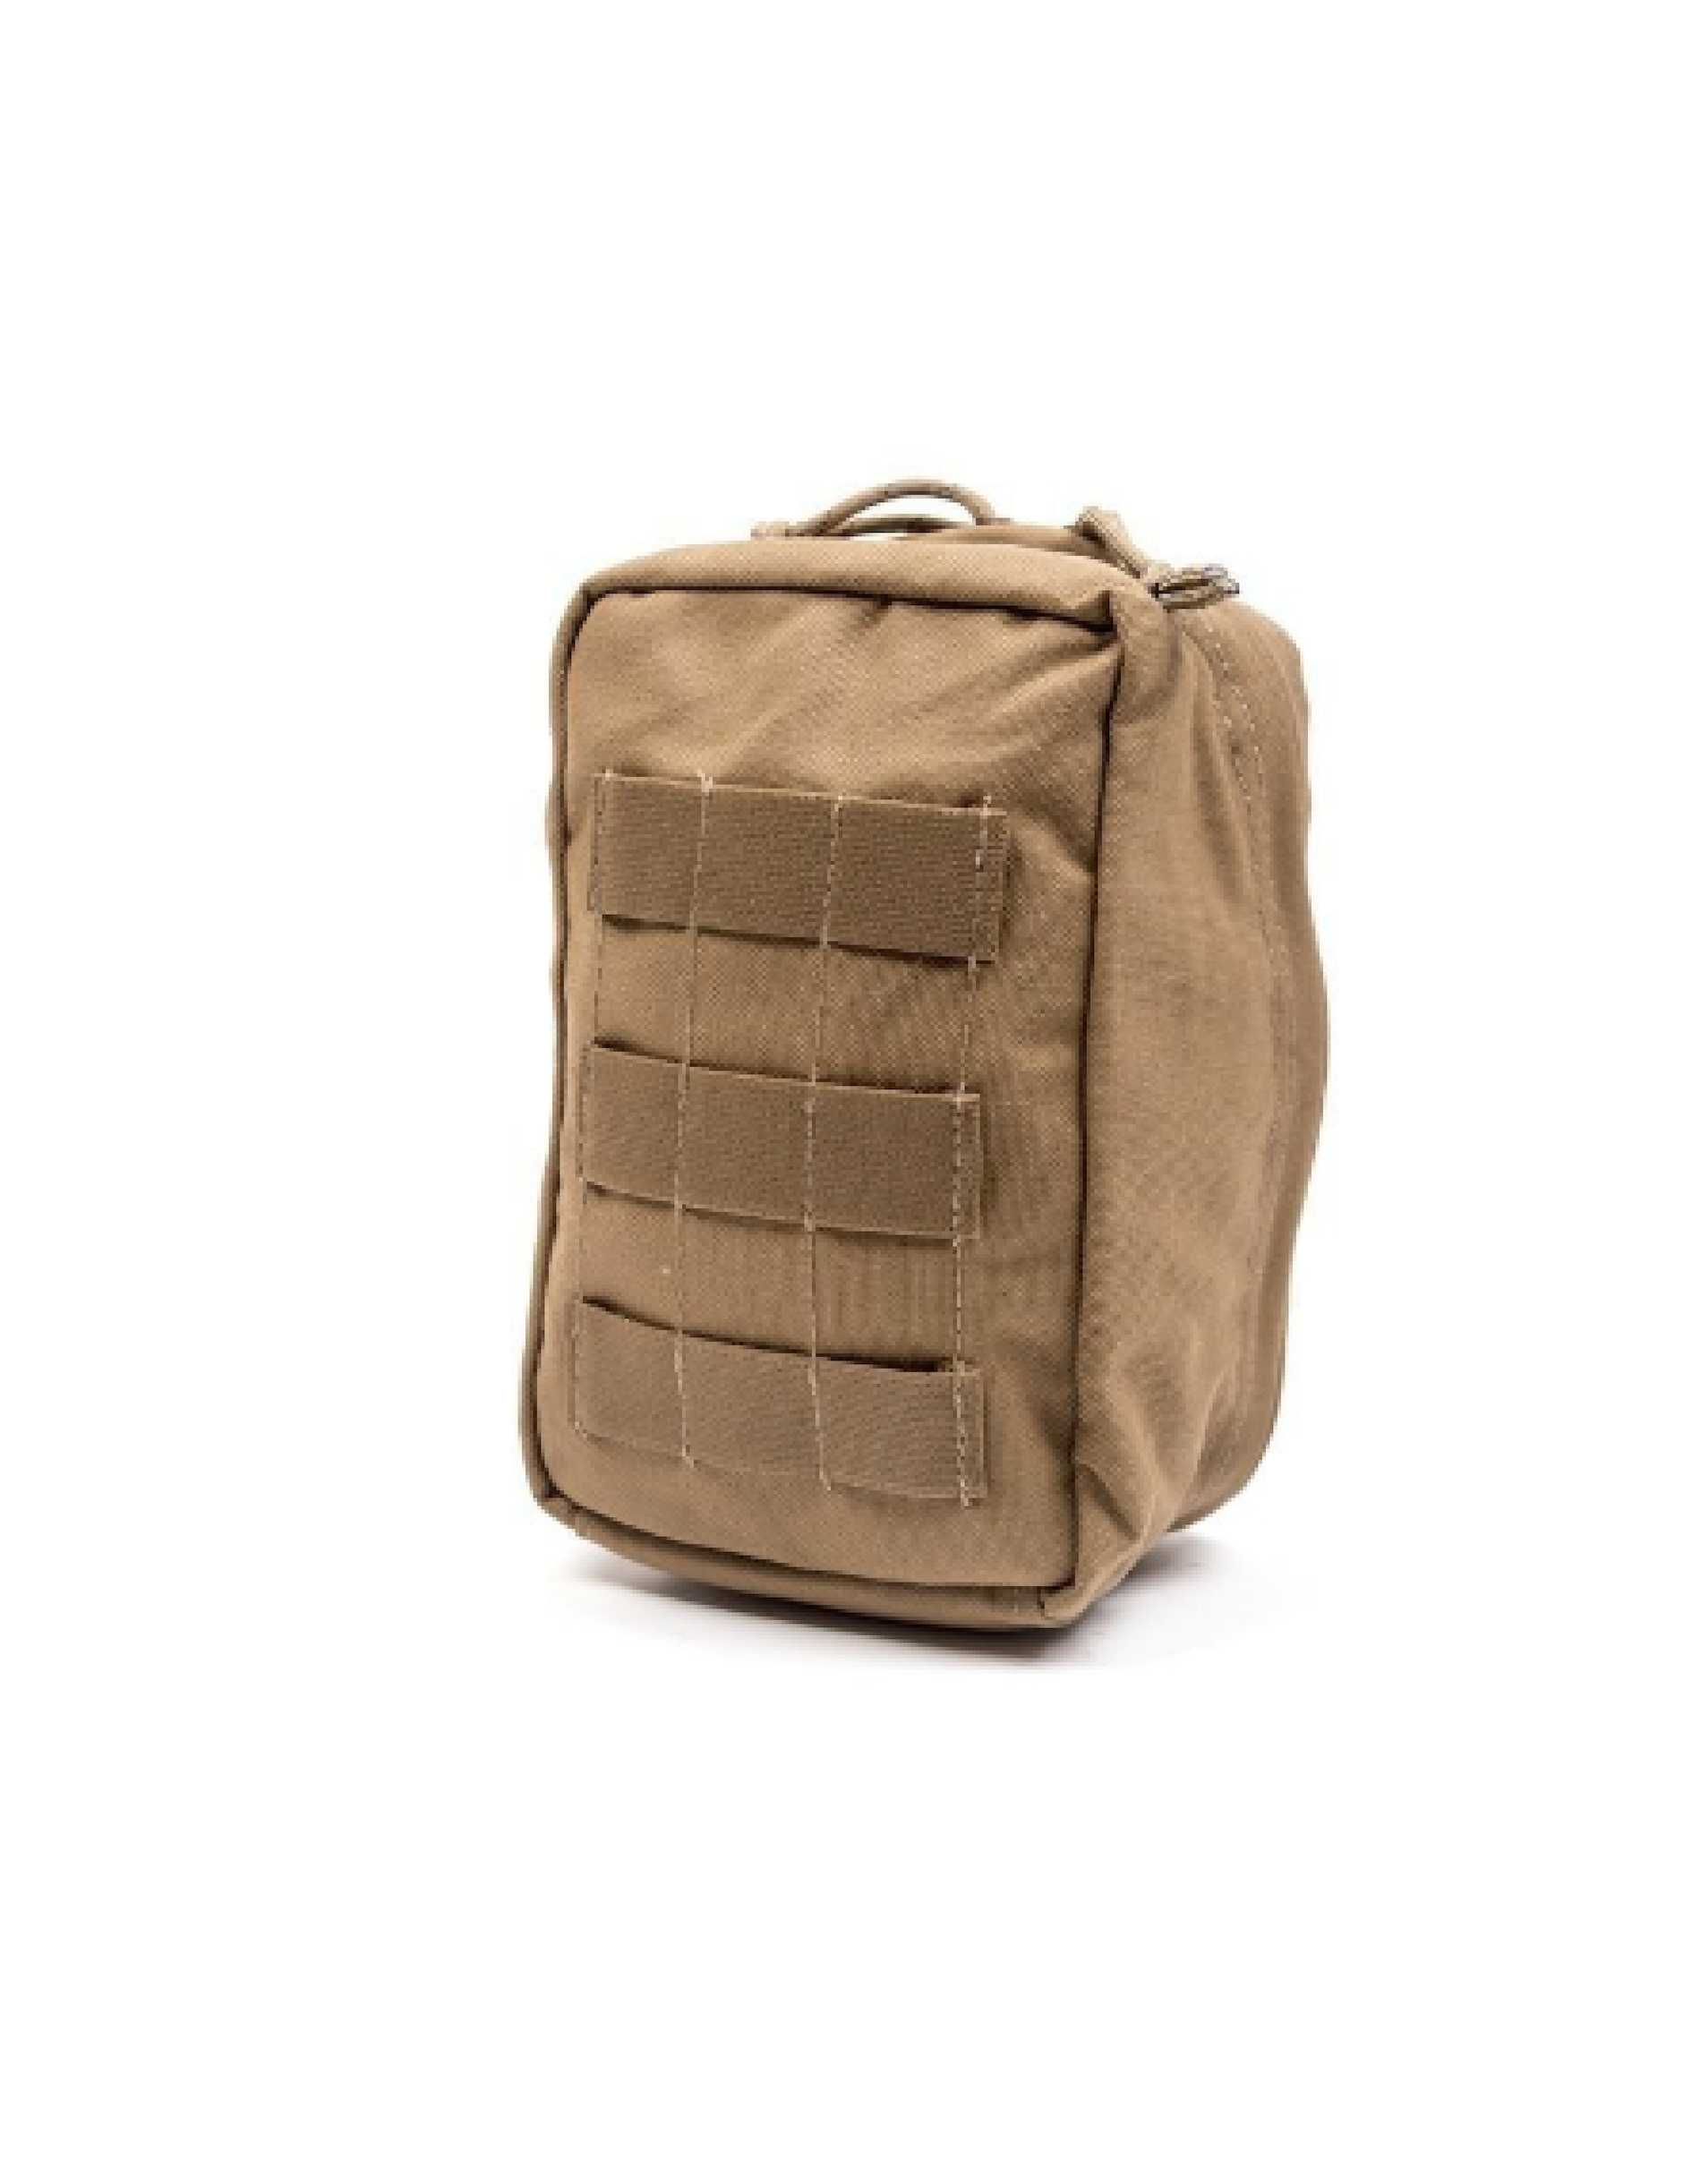 PVS 14 Padded MOLLE pouch - Bushido Tactical